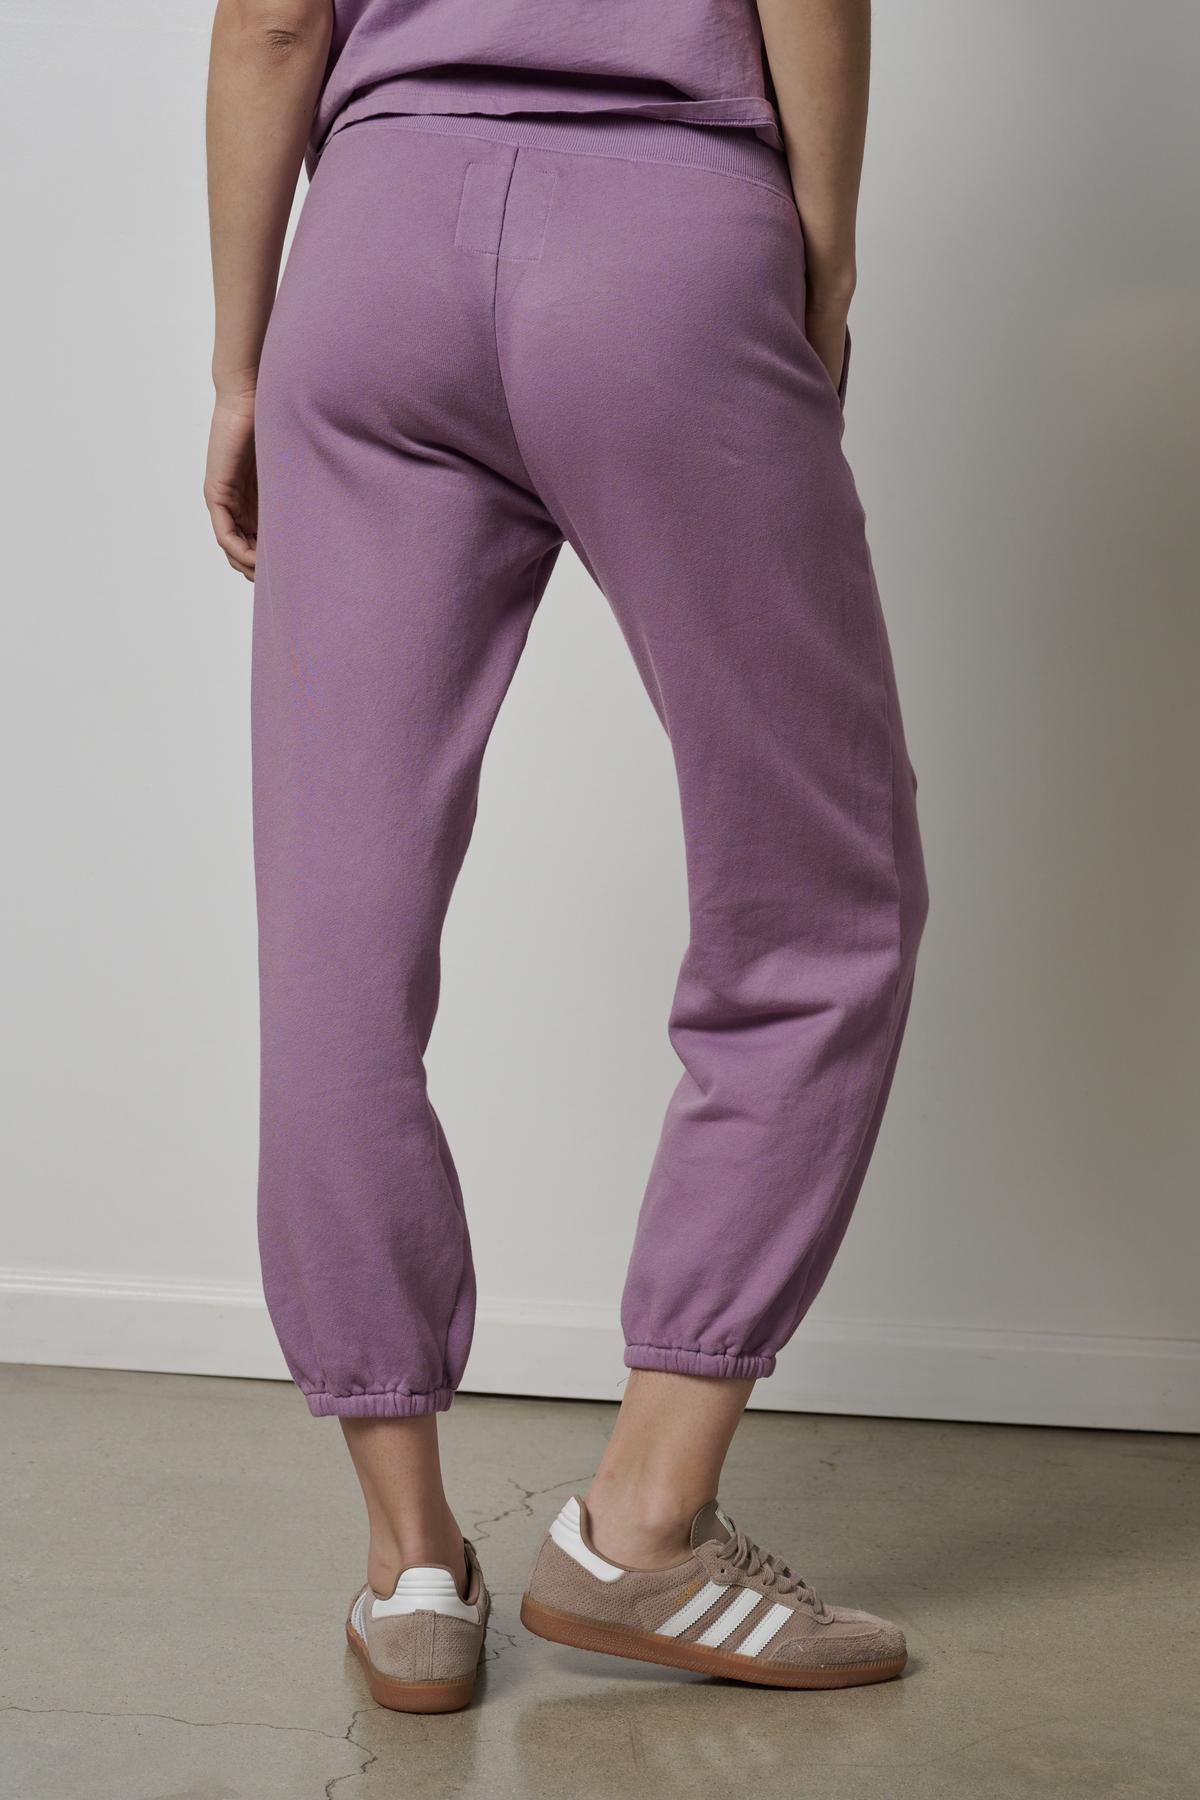 The back view of a woman wearing ZUMA SWEATPANTS by Velvet by Jenny Graham.-26827763646657